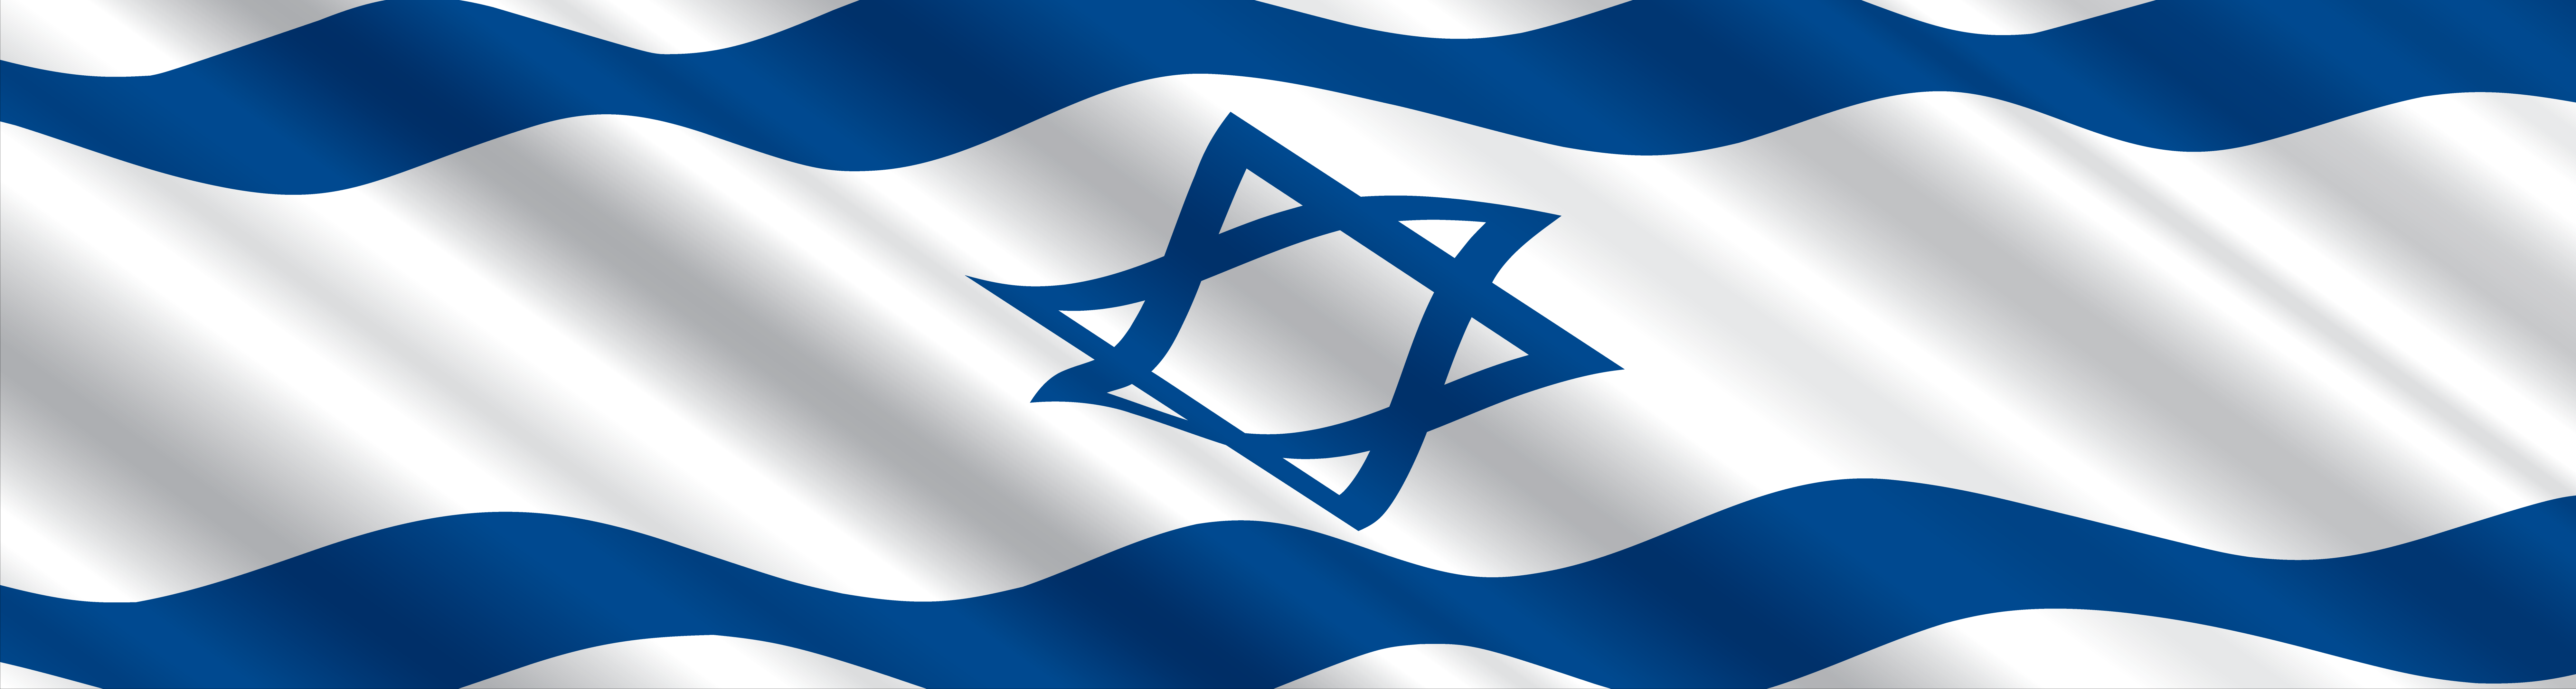 Israeli Flag Photos and Images & Pictures